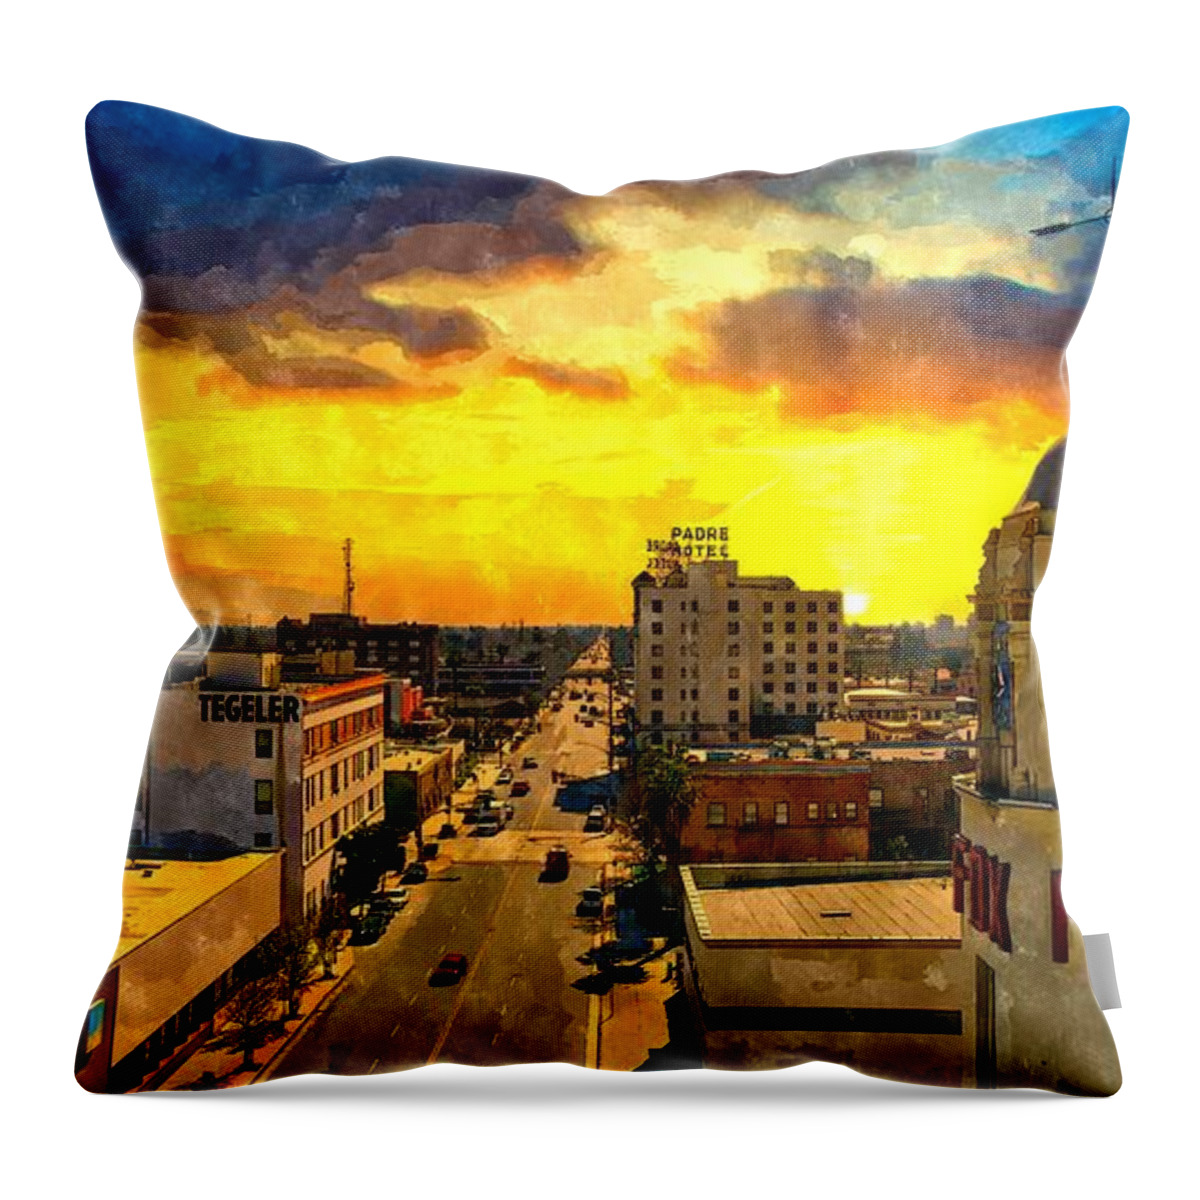 Bakersfield Throw Pillow featuring the digital art Panorama of downtown Bakersfield, California - watercolor painting by Nicko Prints